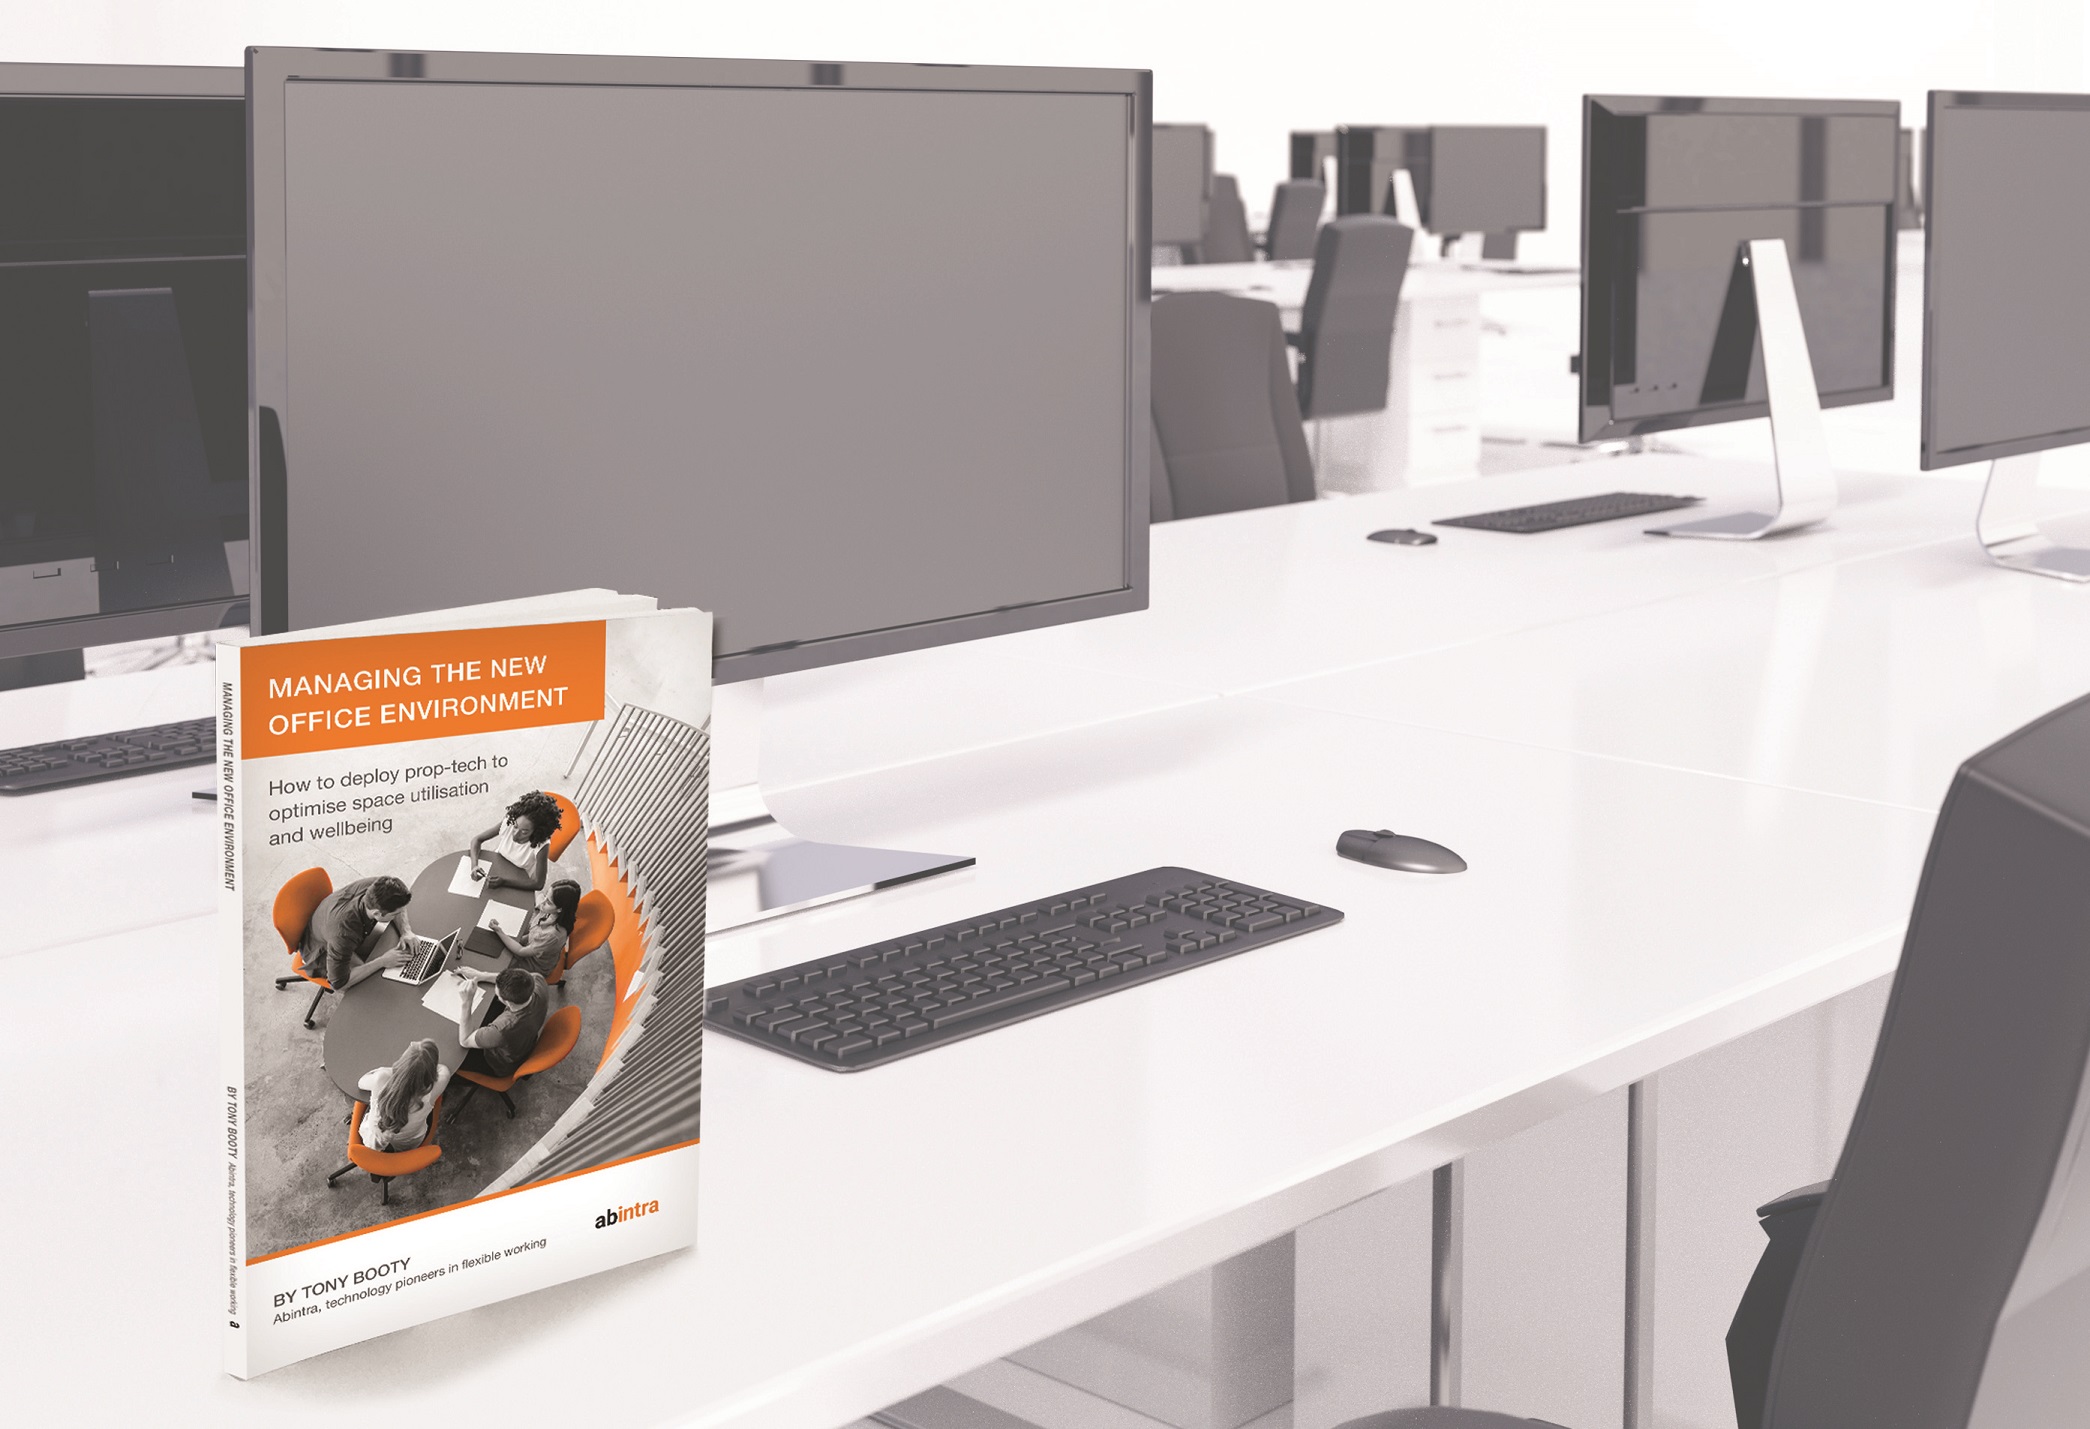 Abintra's book explains that accurate workplace data is key to managing hybrid working